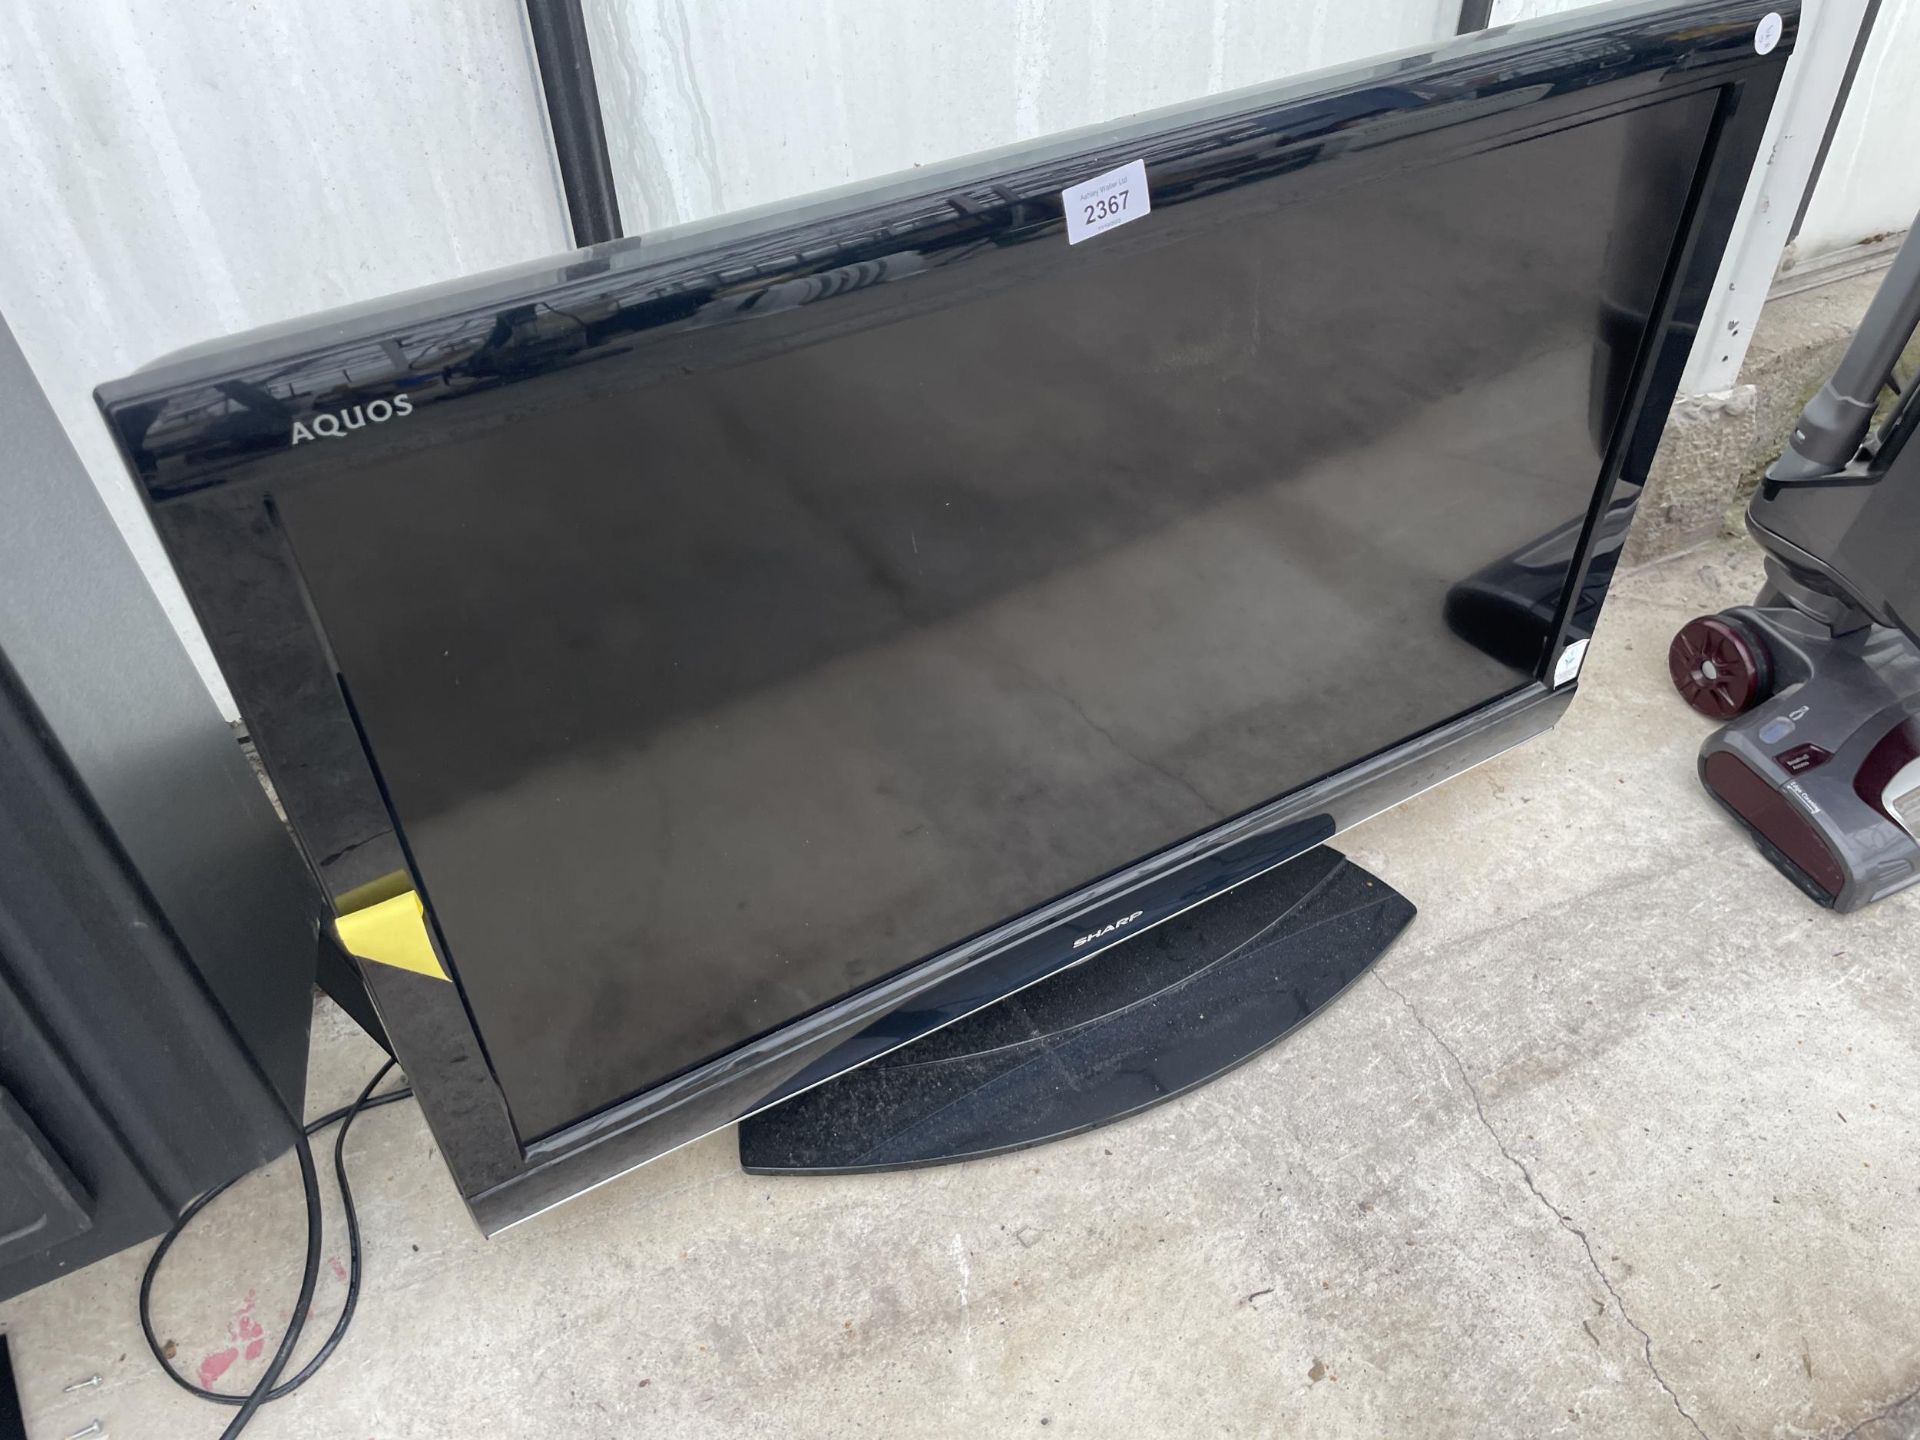 A SHARP 32" TELEVISION WITH REMOTE CONTROL